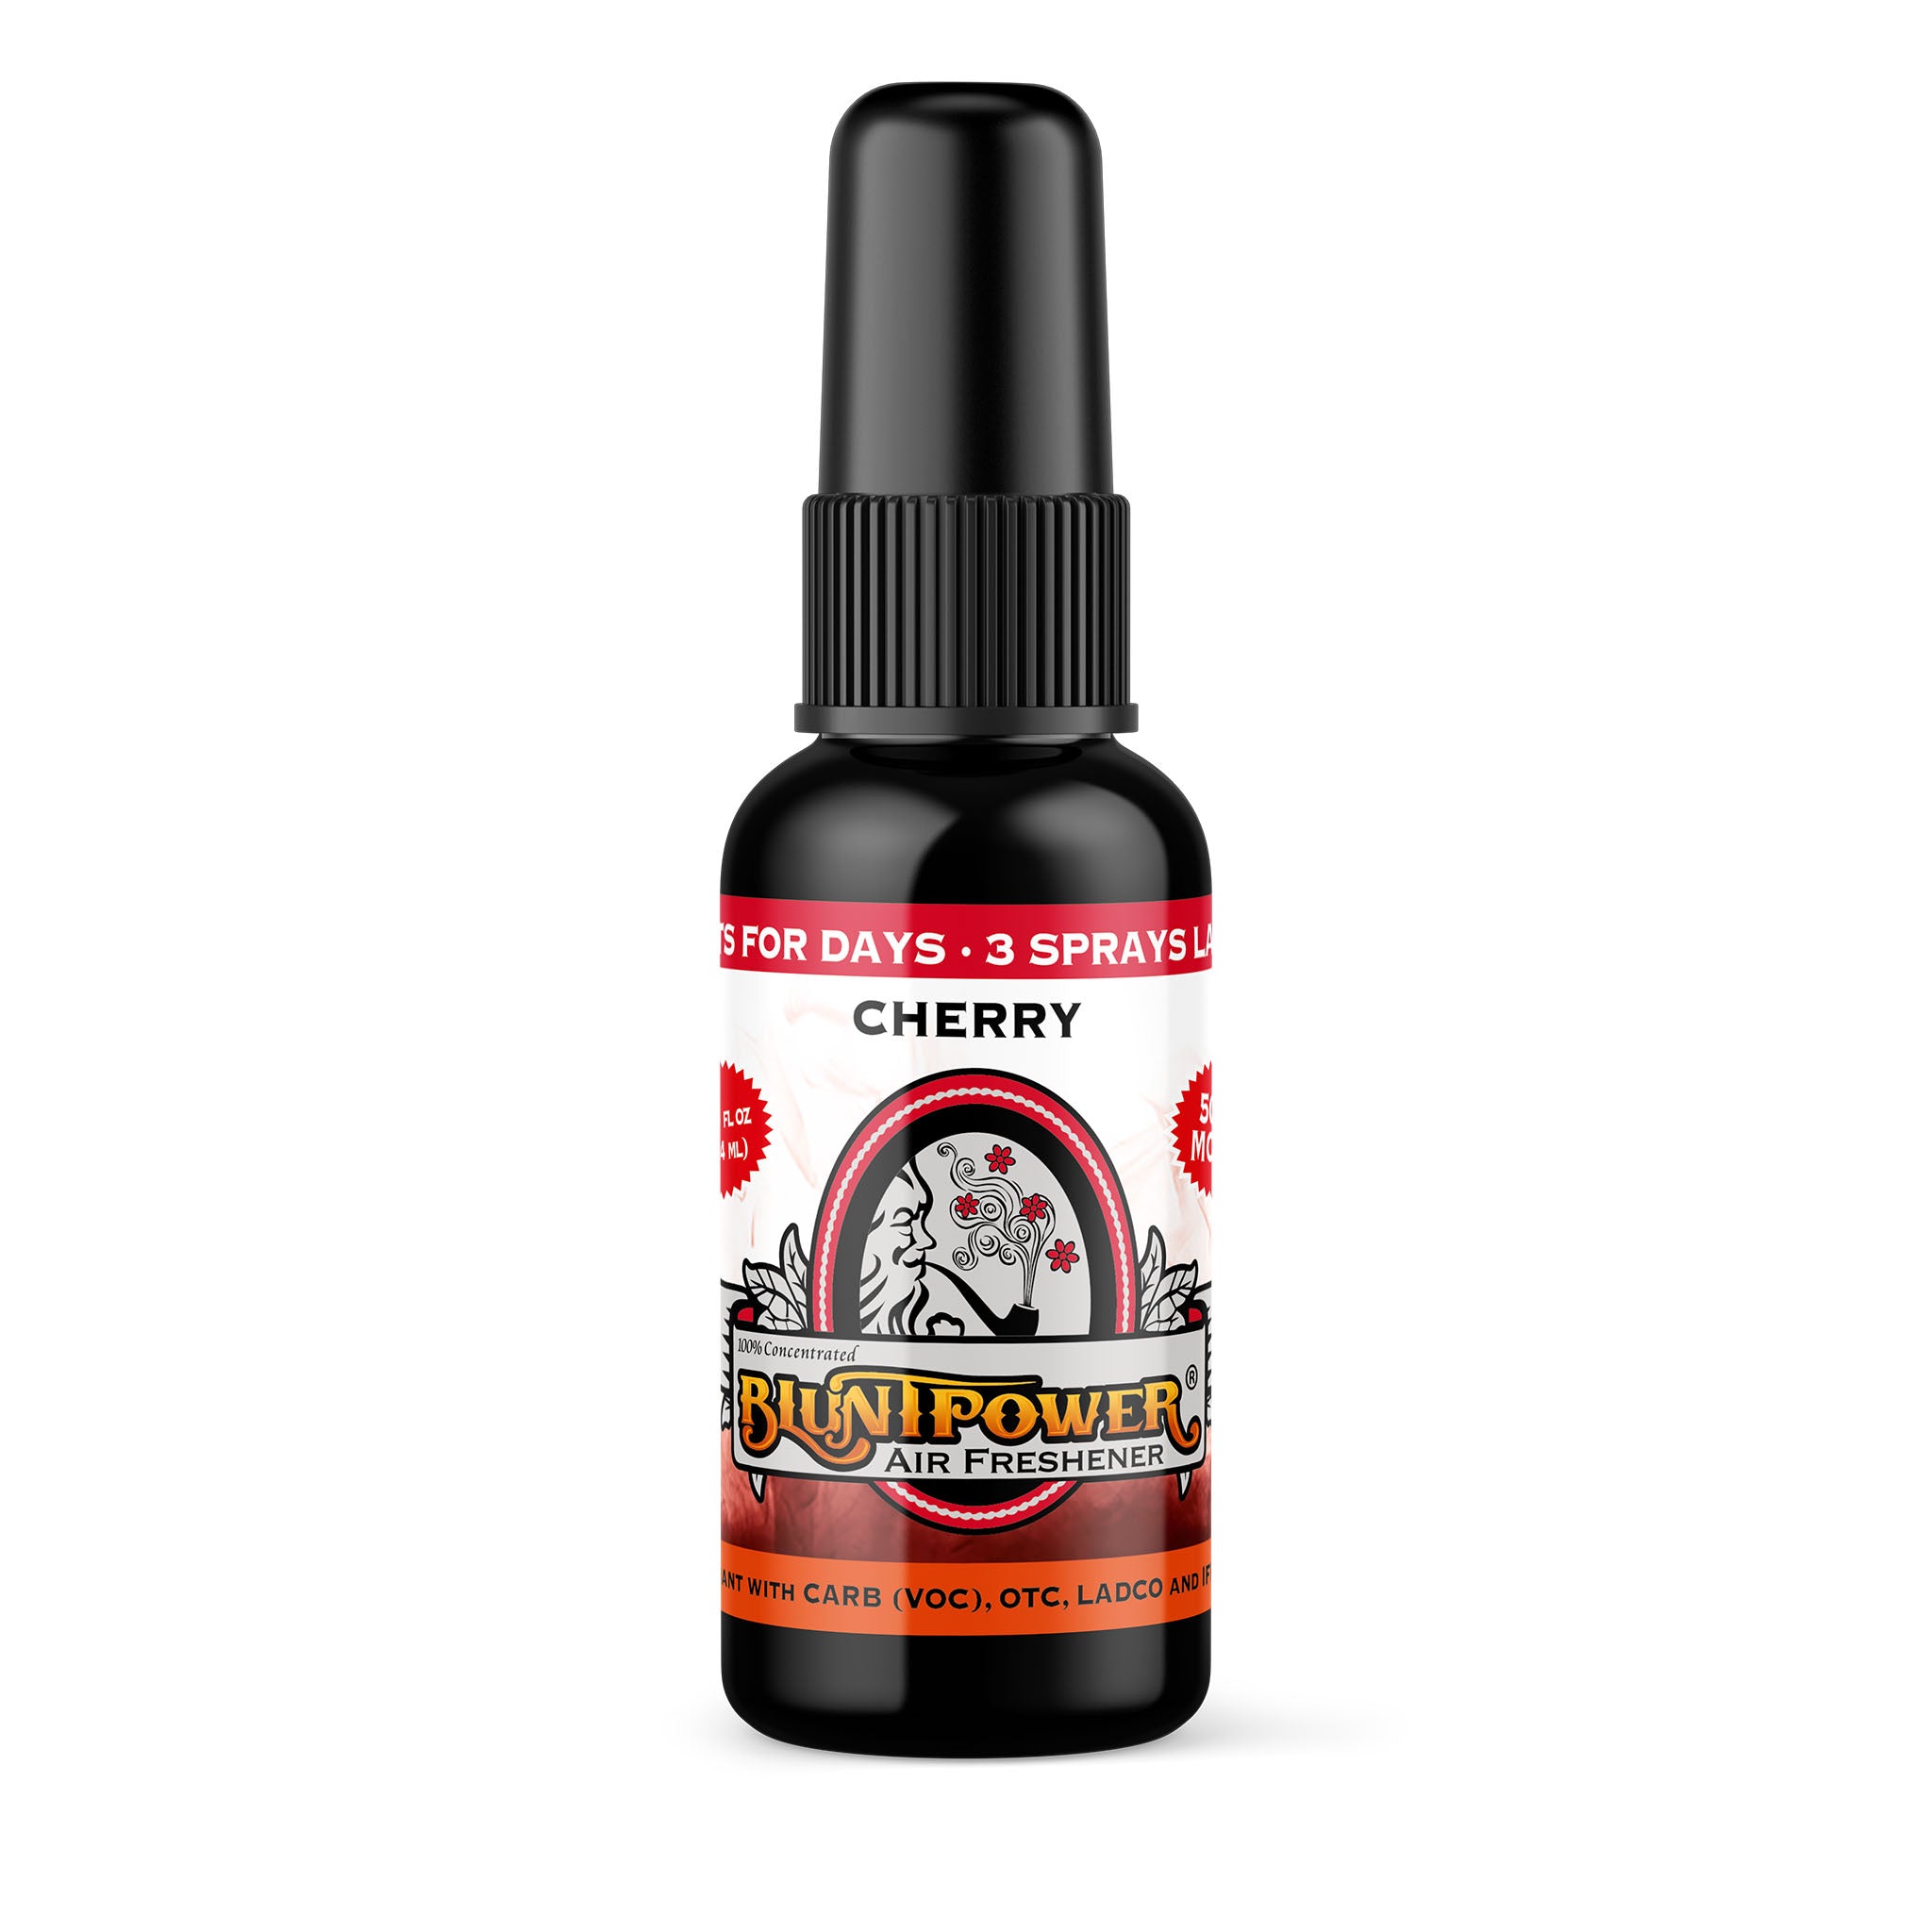 Scent Bomb Air Freshener Spray, 100 % Oil Based Concentrated Air